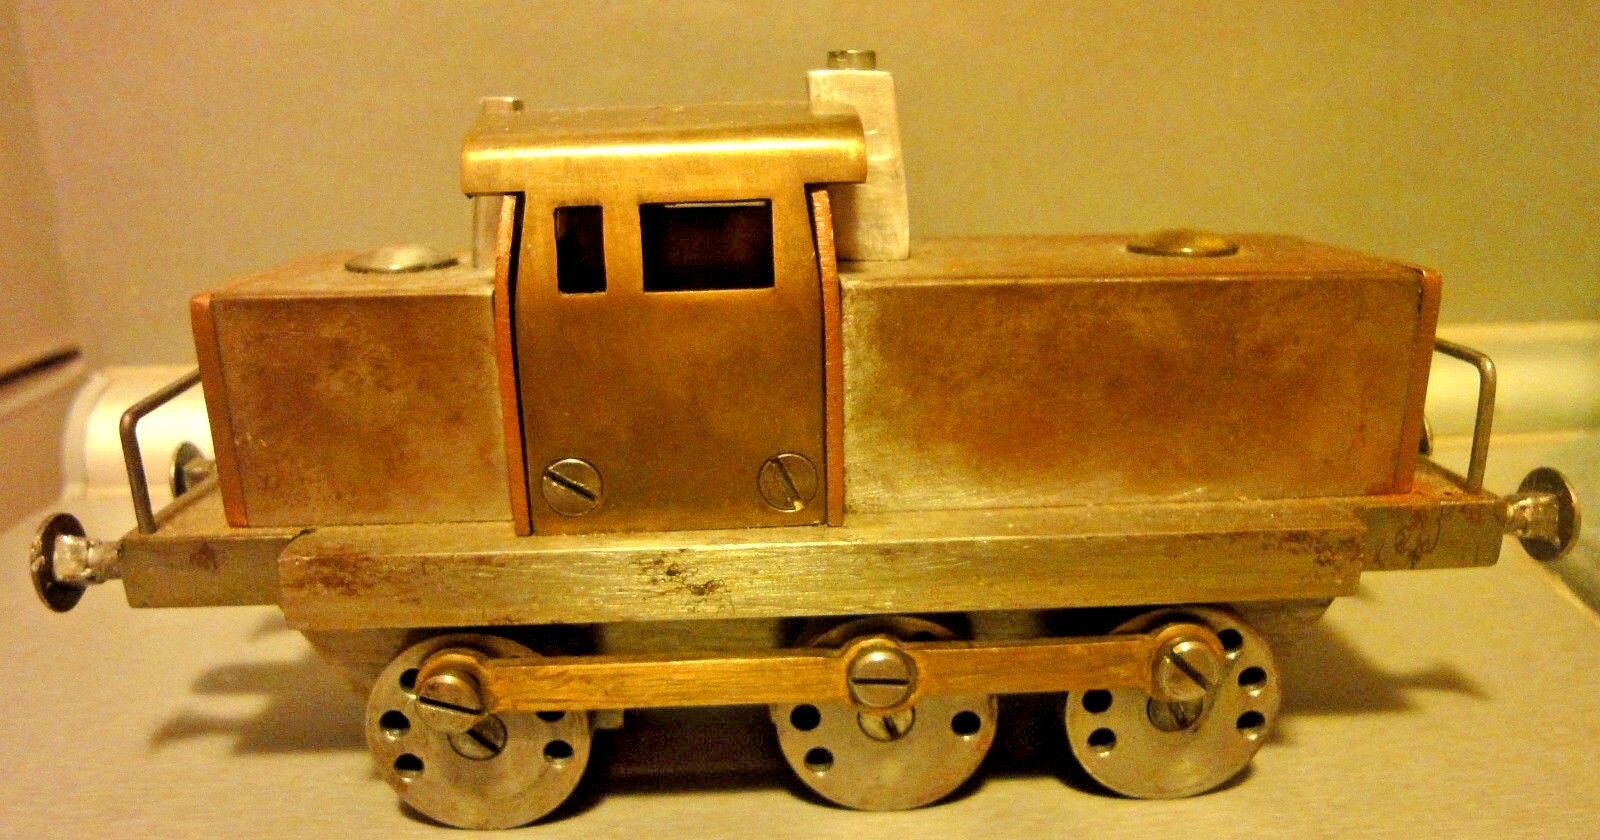 Heavy Steal Metal Art All Handmade Locomotive Train only one of a kind